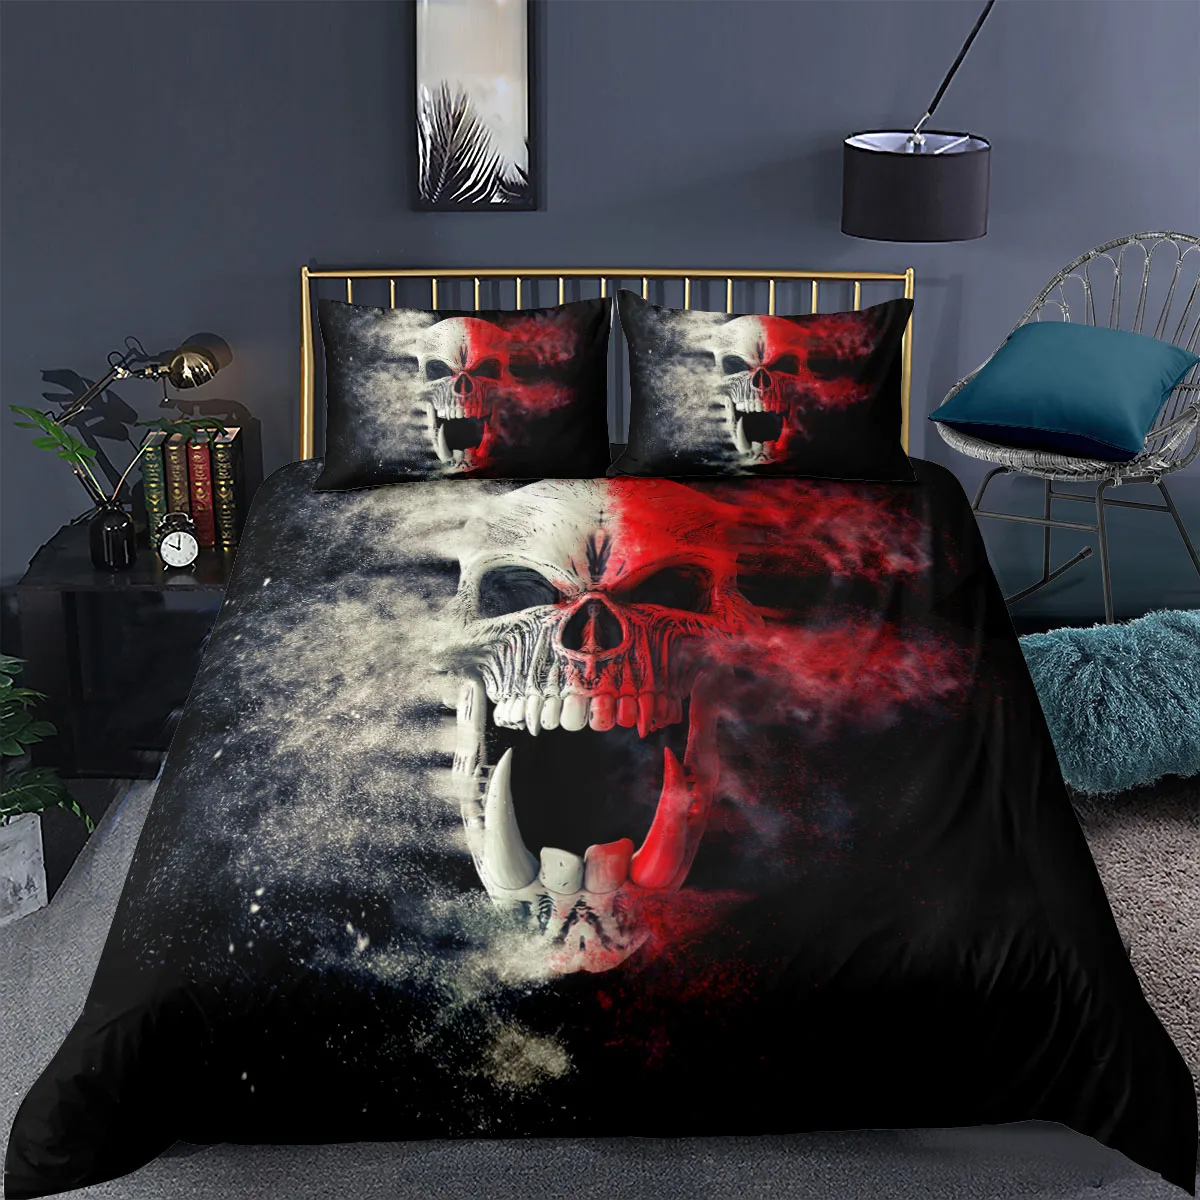 Skull Bedding Set 3d Gothic Styles Bedroom Duvet Cover 2/3pc Horror Comforter Covers King Queen Full Twin Size Home Textiles